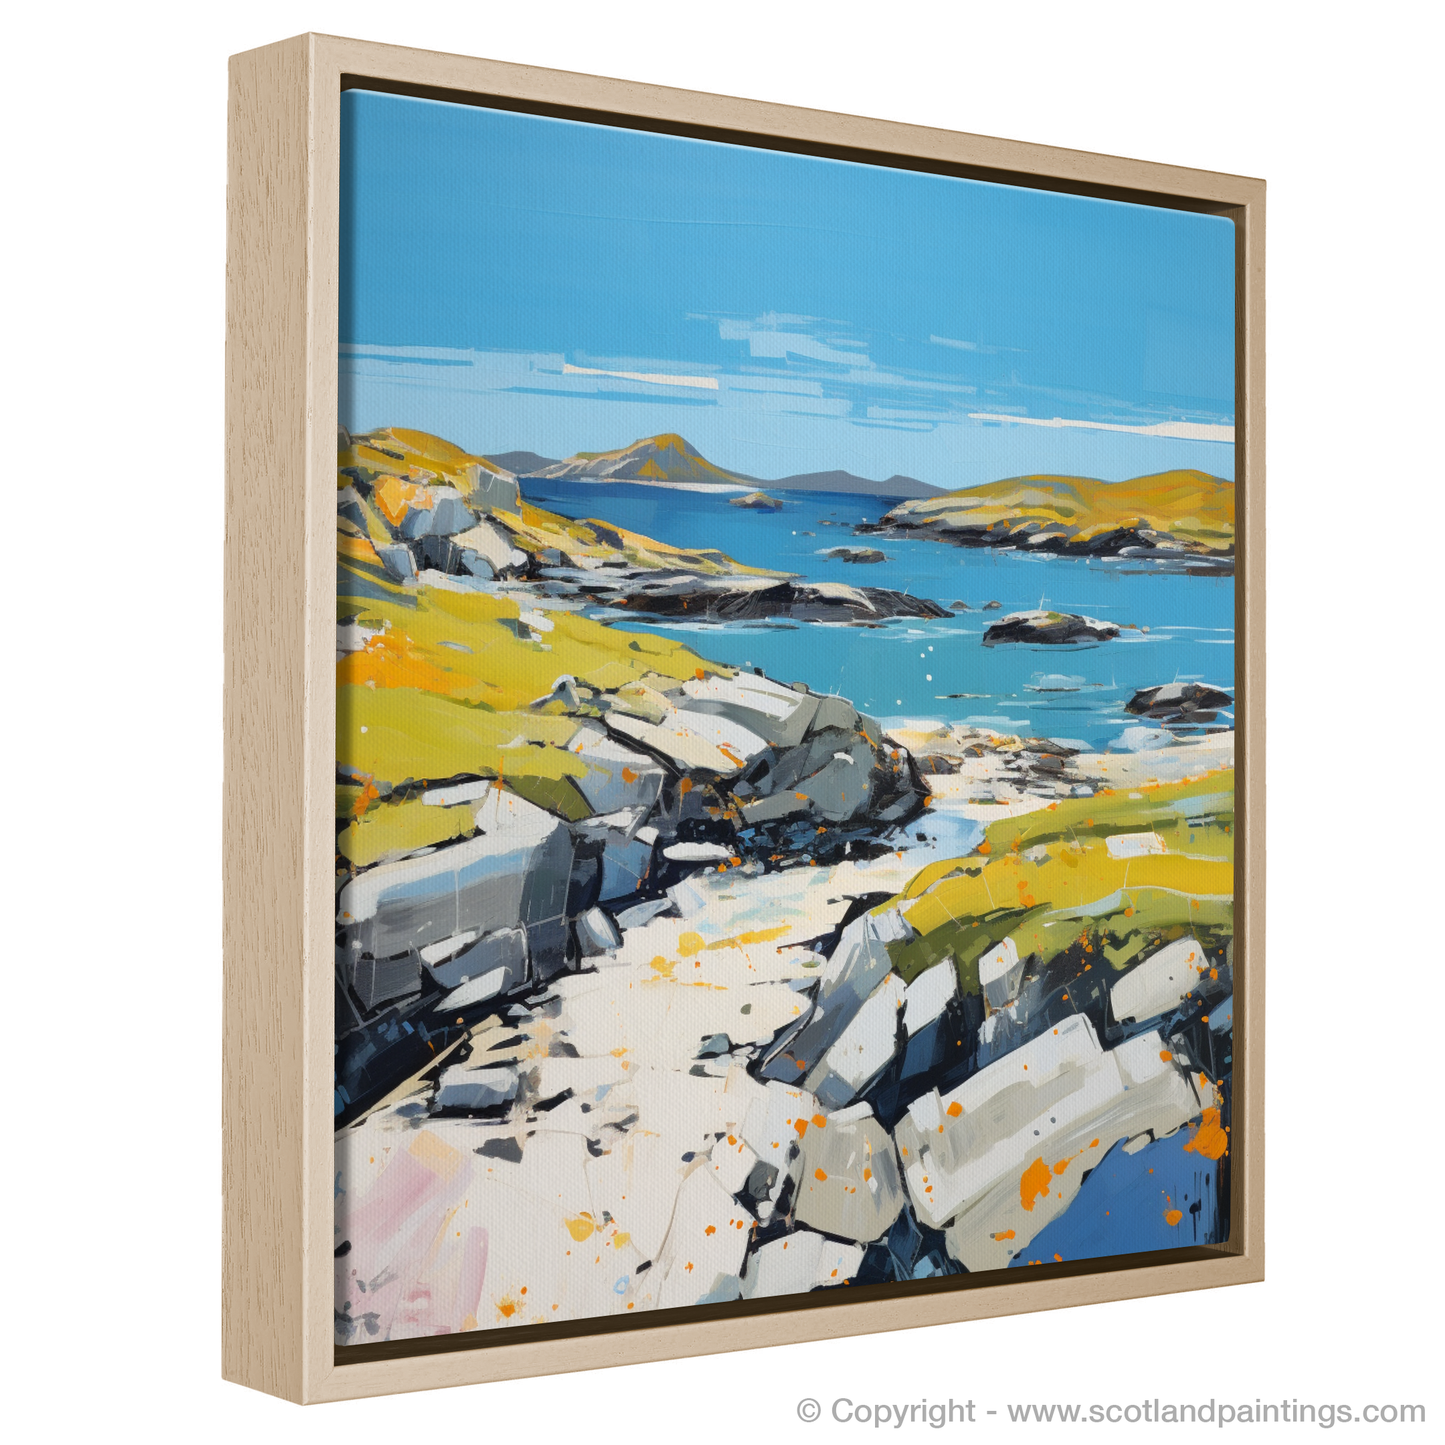 Painting and Art Print of Isle of Harris, Outer Hebrides in summer entitled "Summer Vibrance on the Isle of Harris".